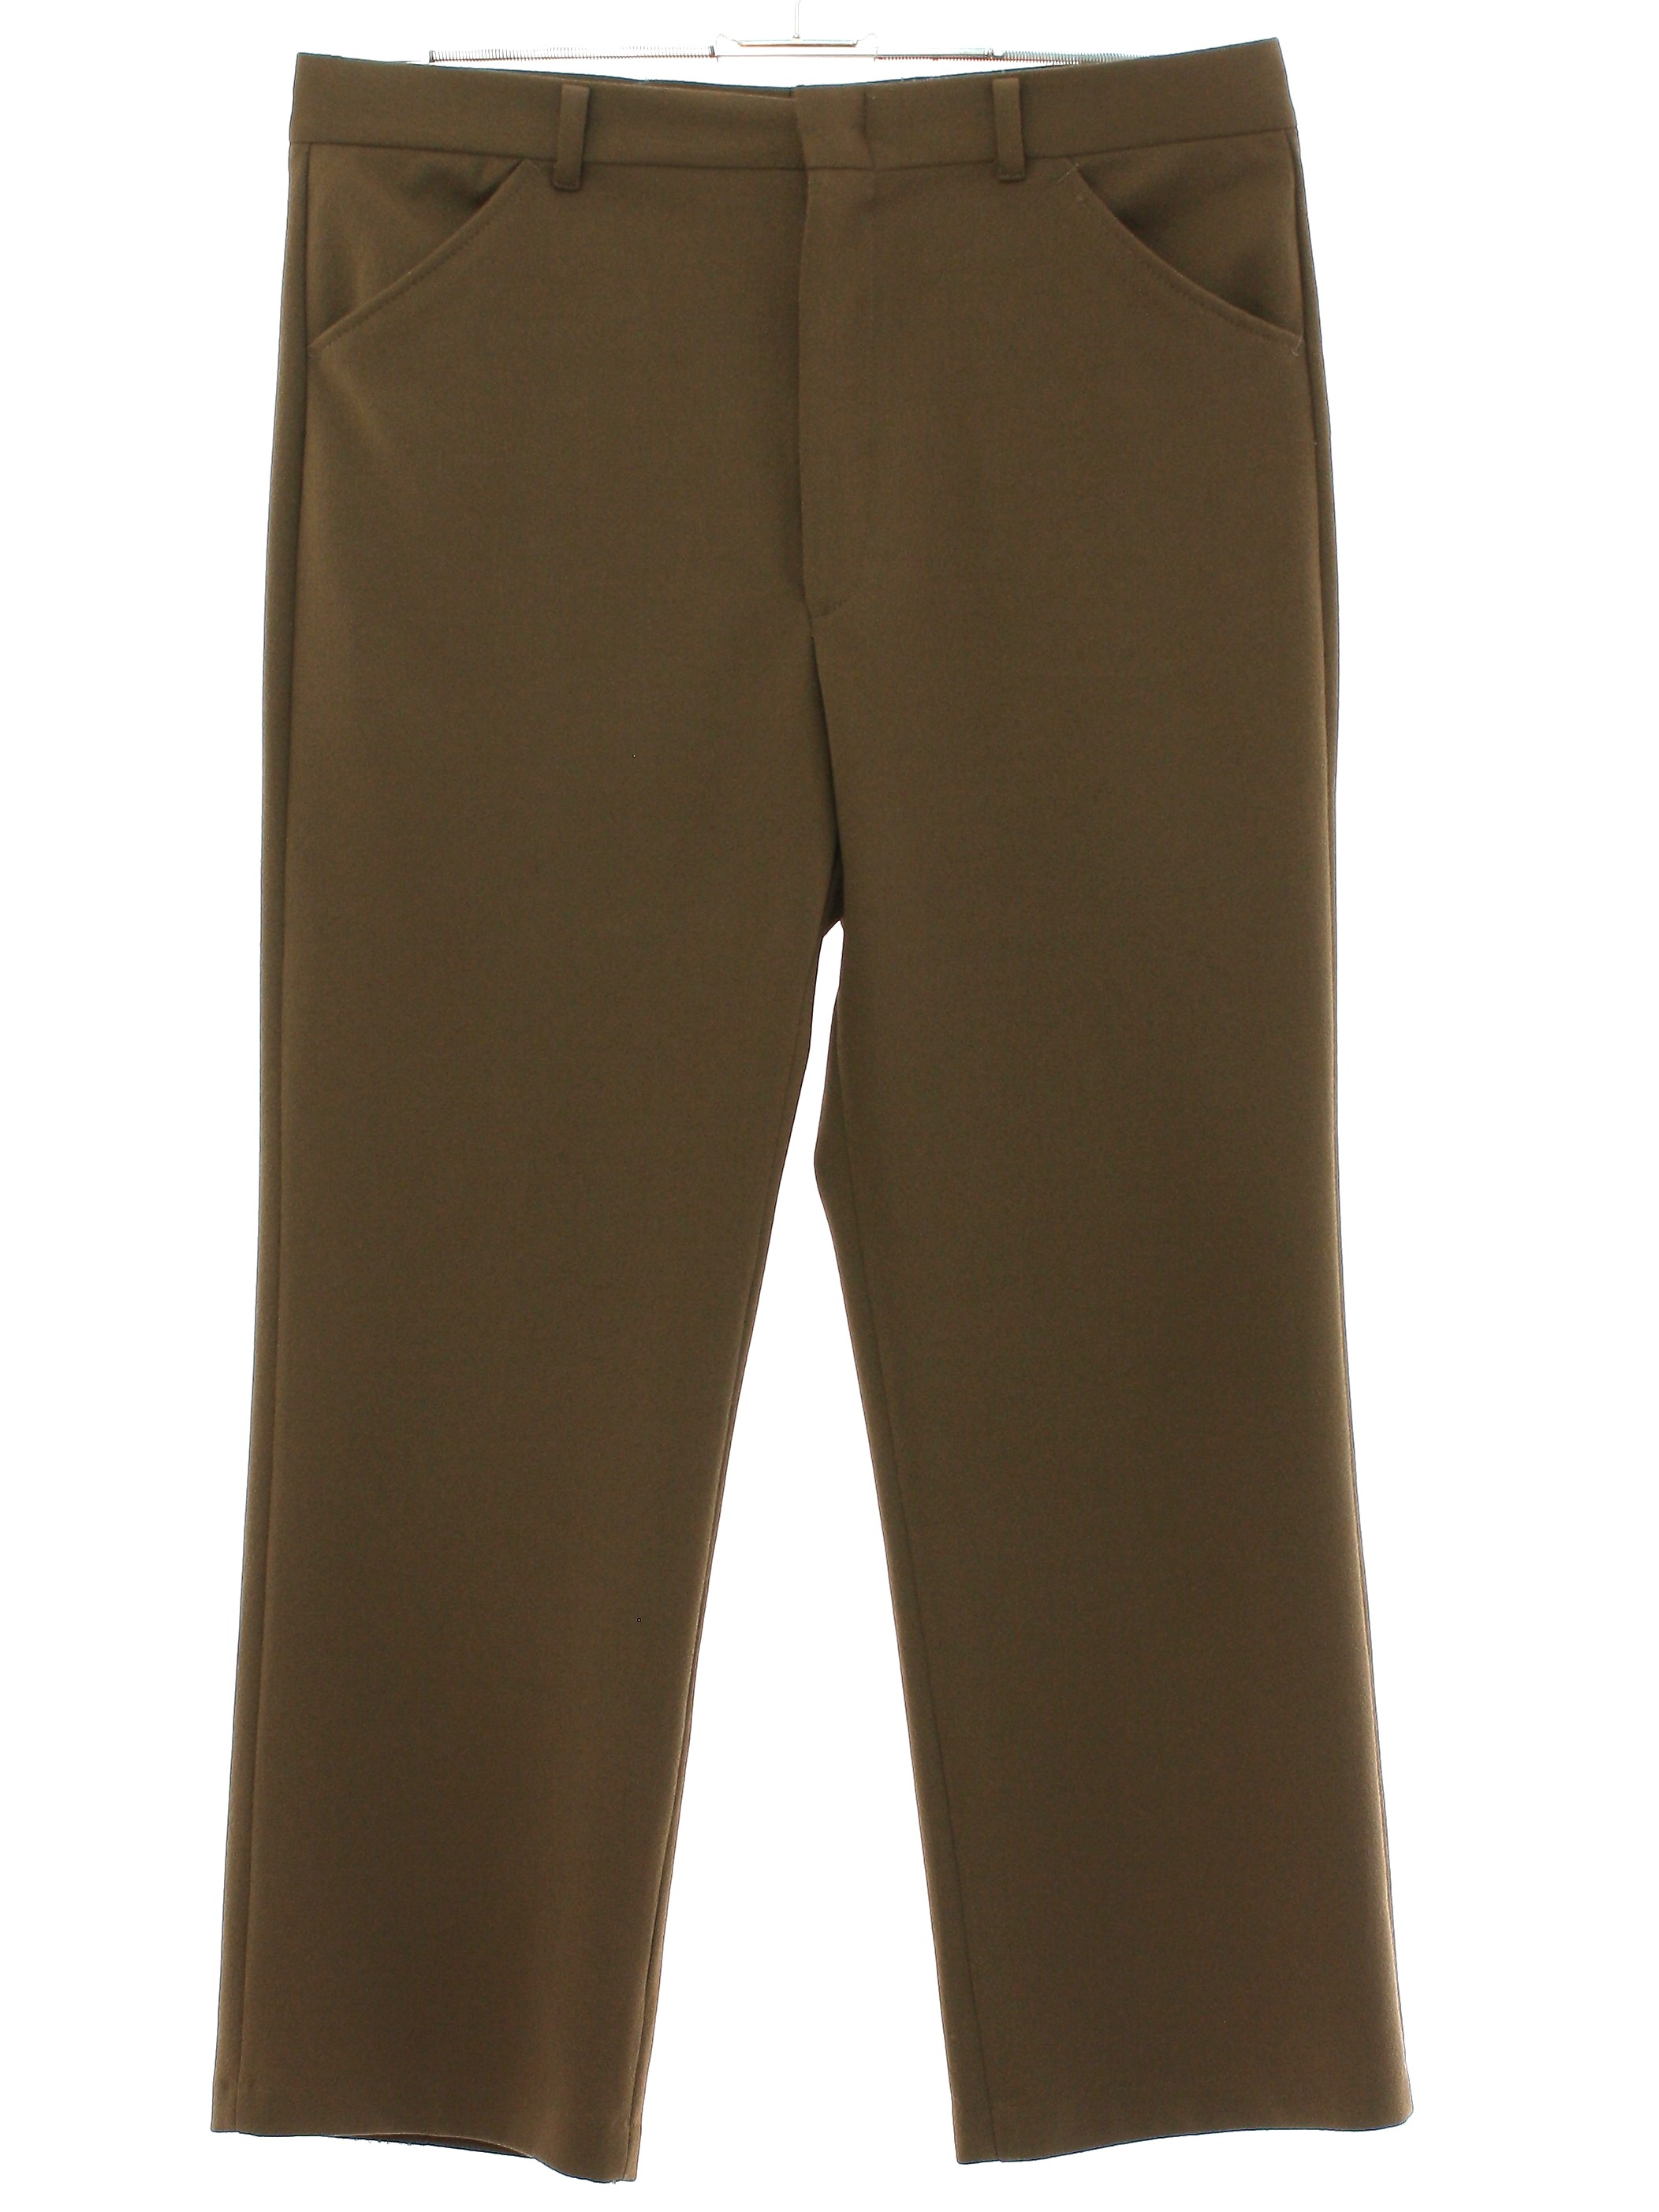 Seventies Haband of Paterson Pants: 70s -Haband of Paterson- Mens brown ...